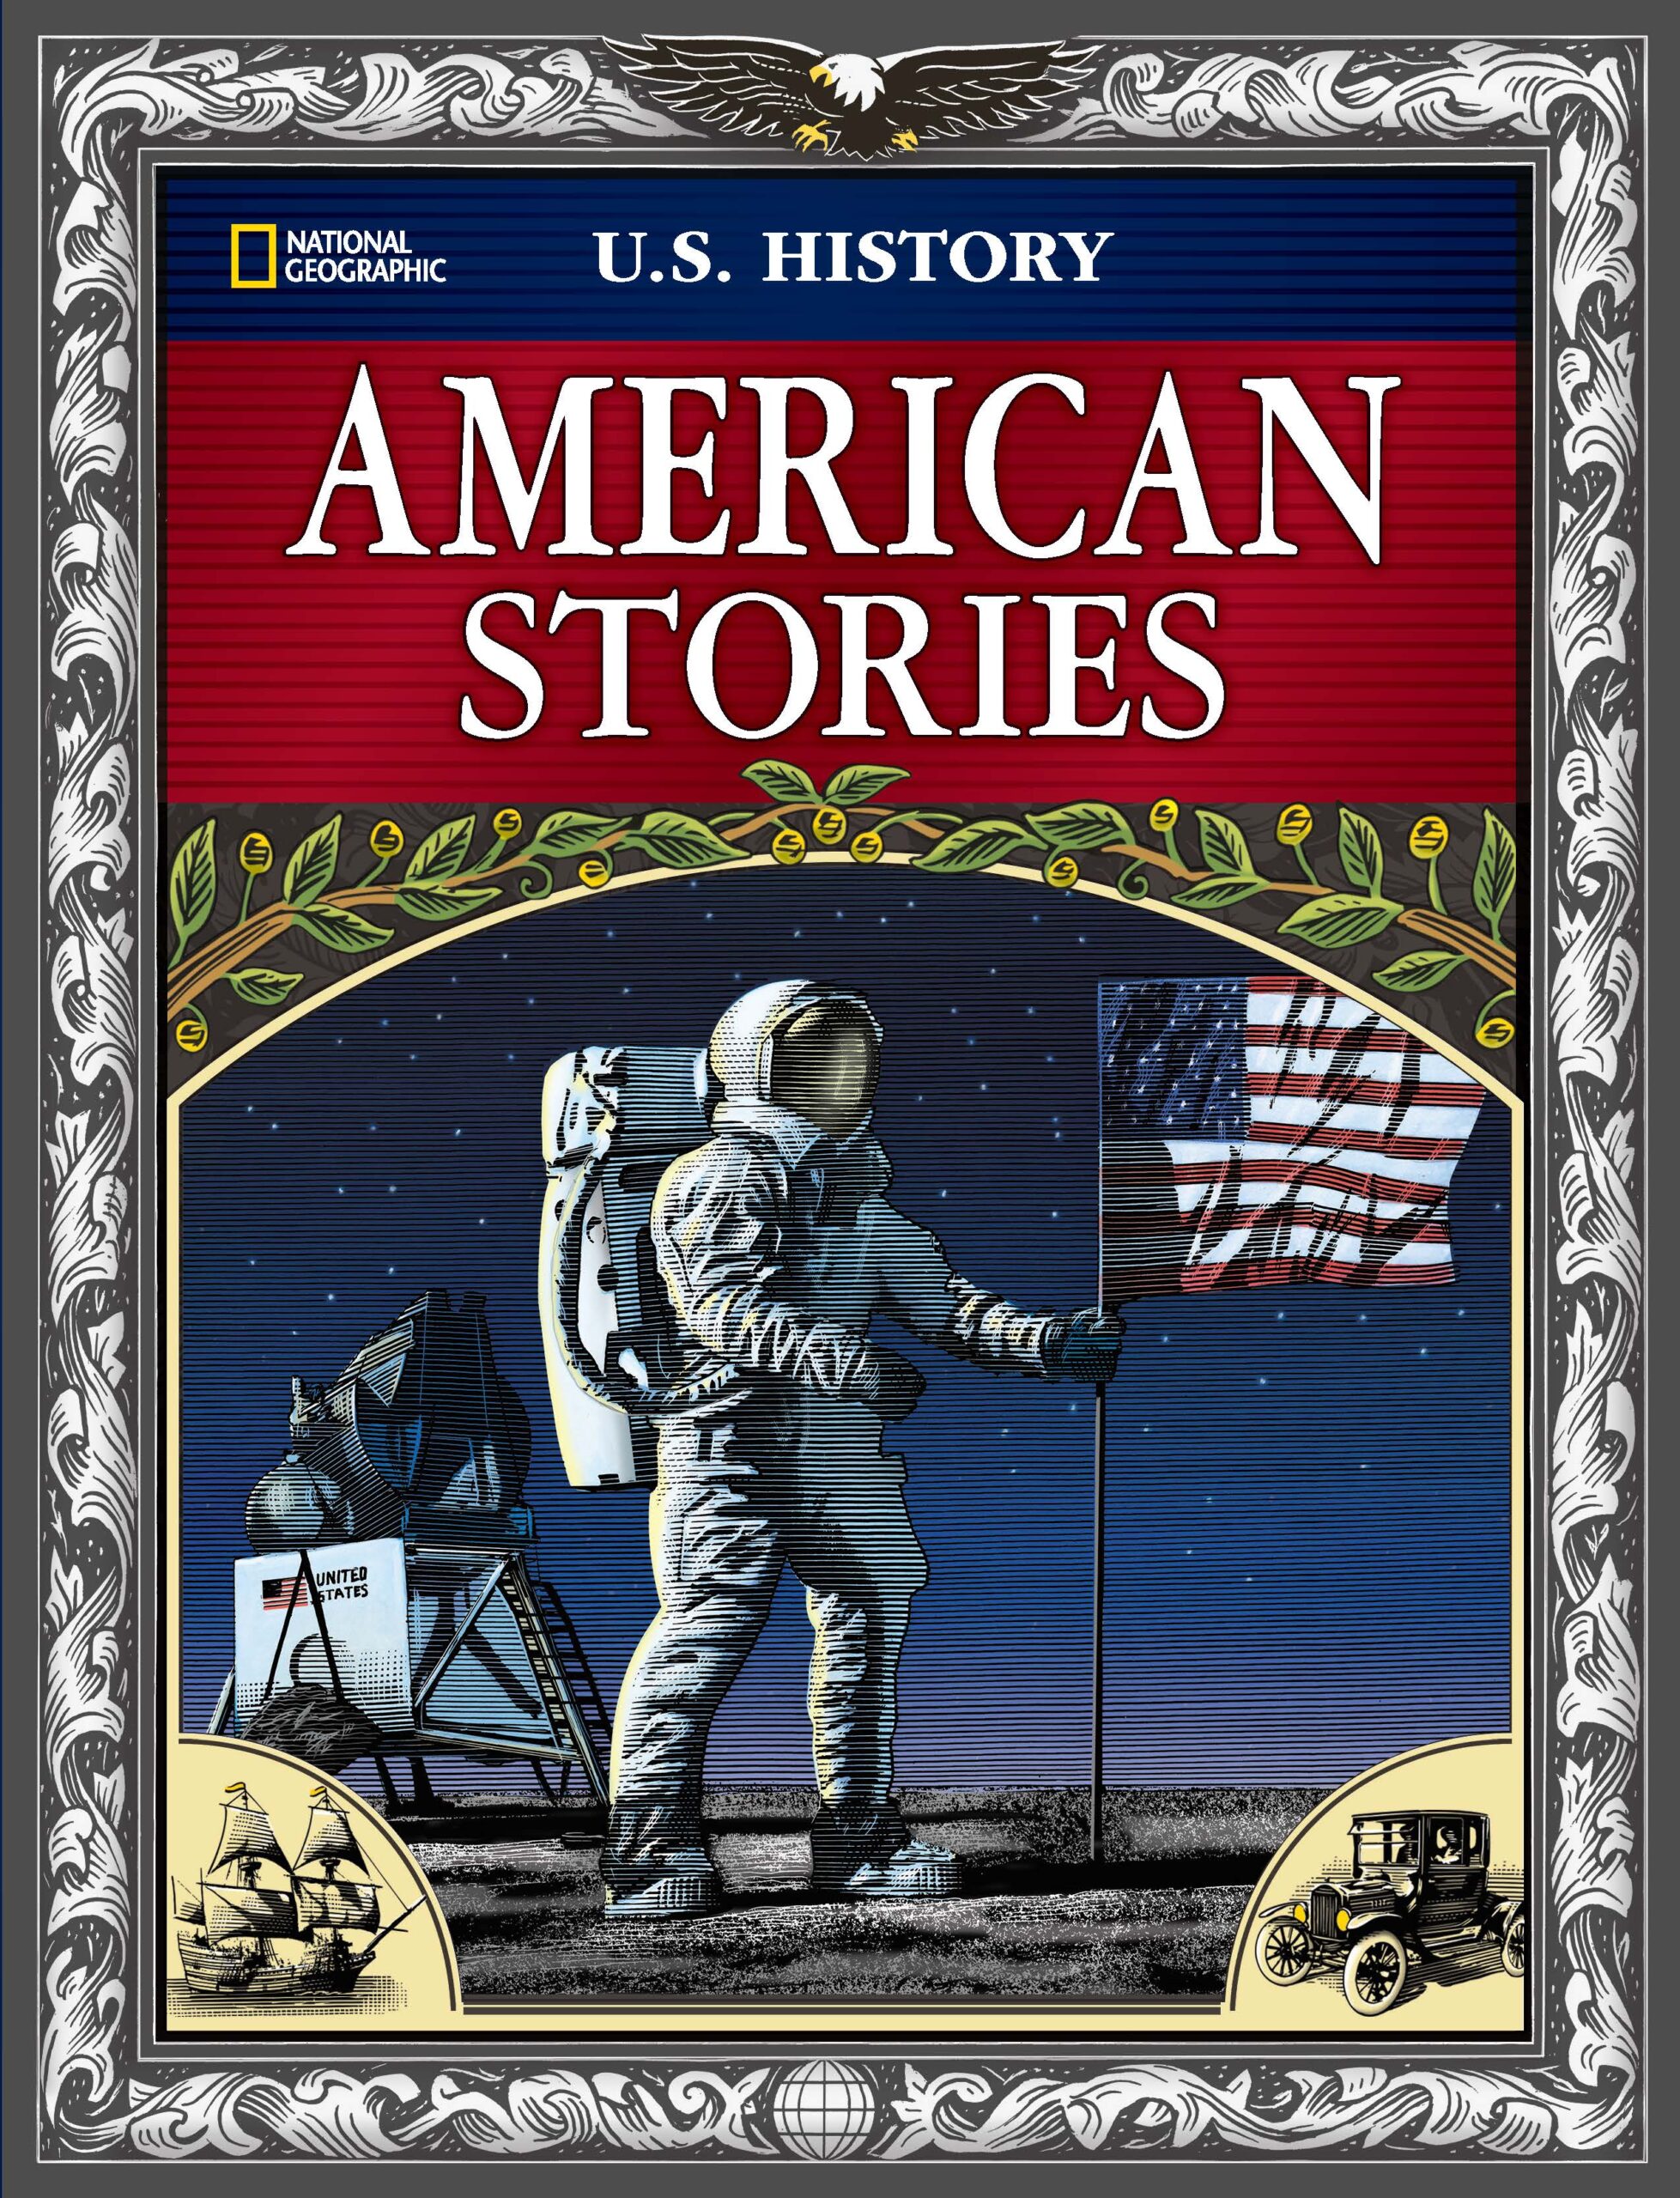 National Geographic U.S History American Stories cover